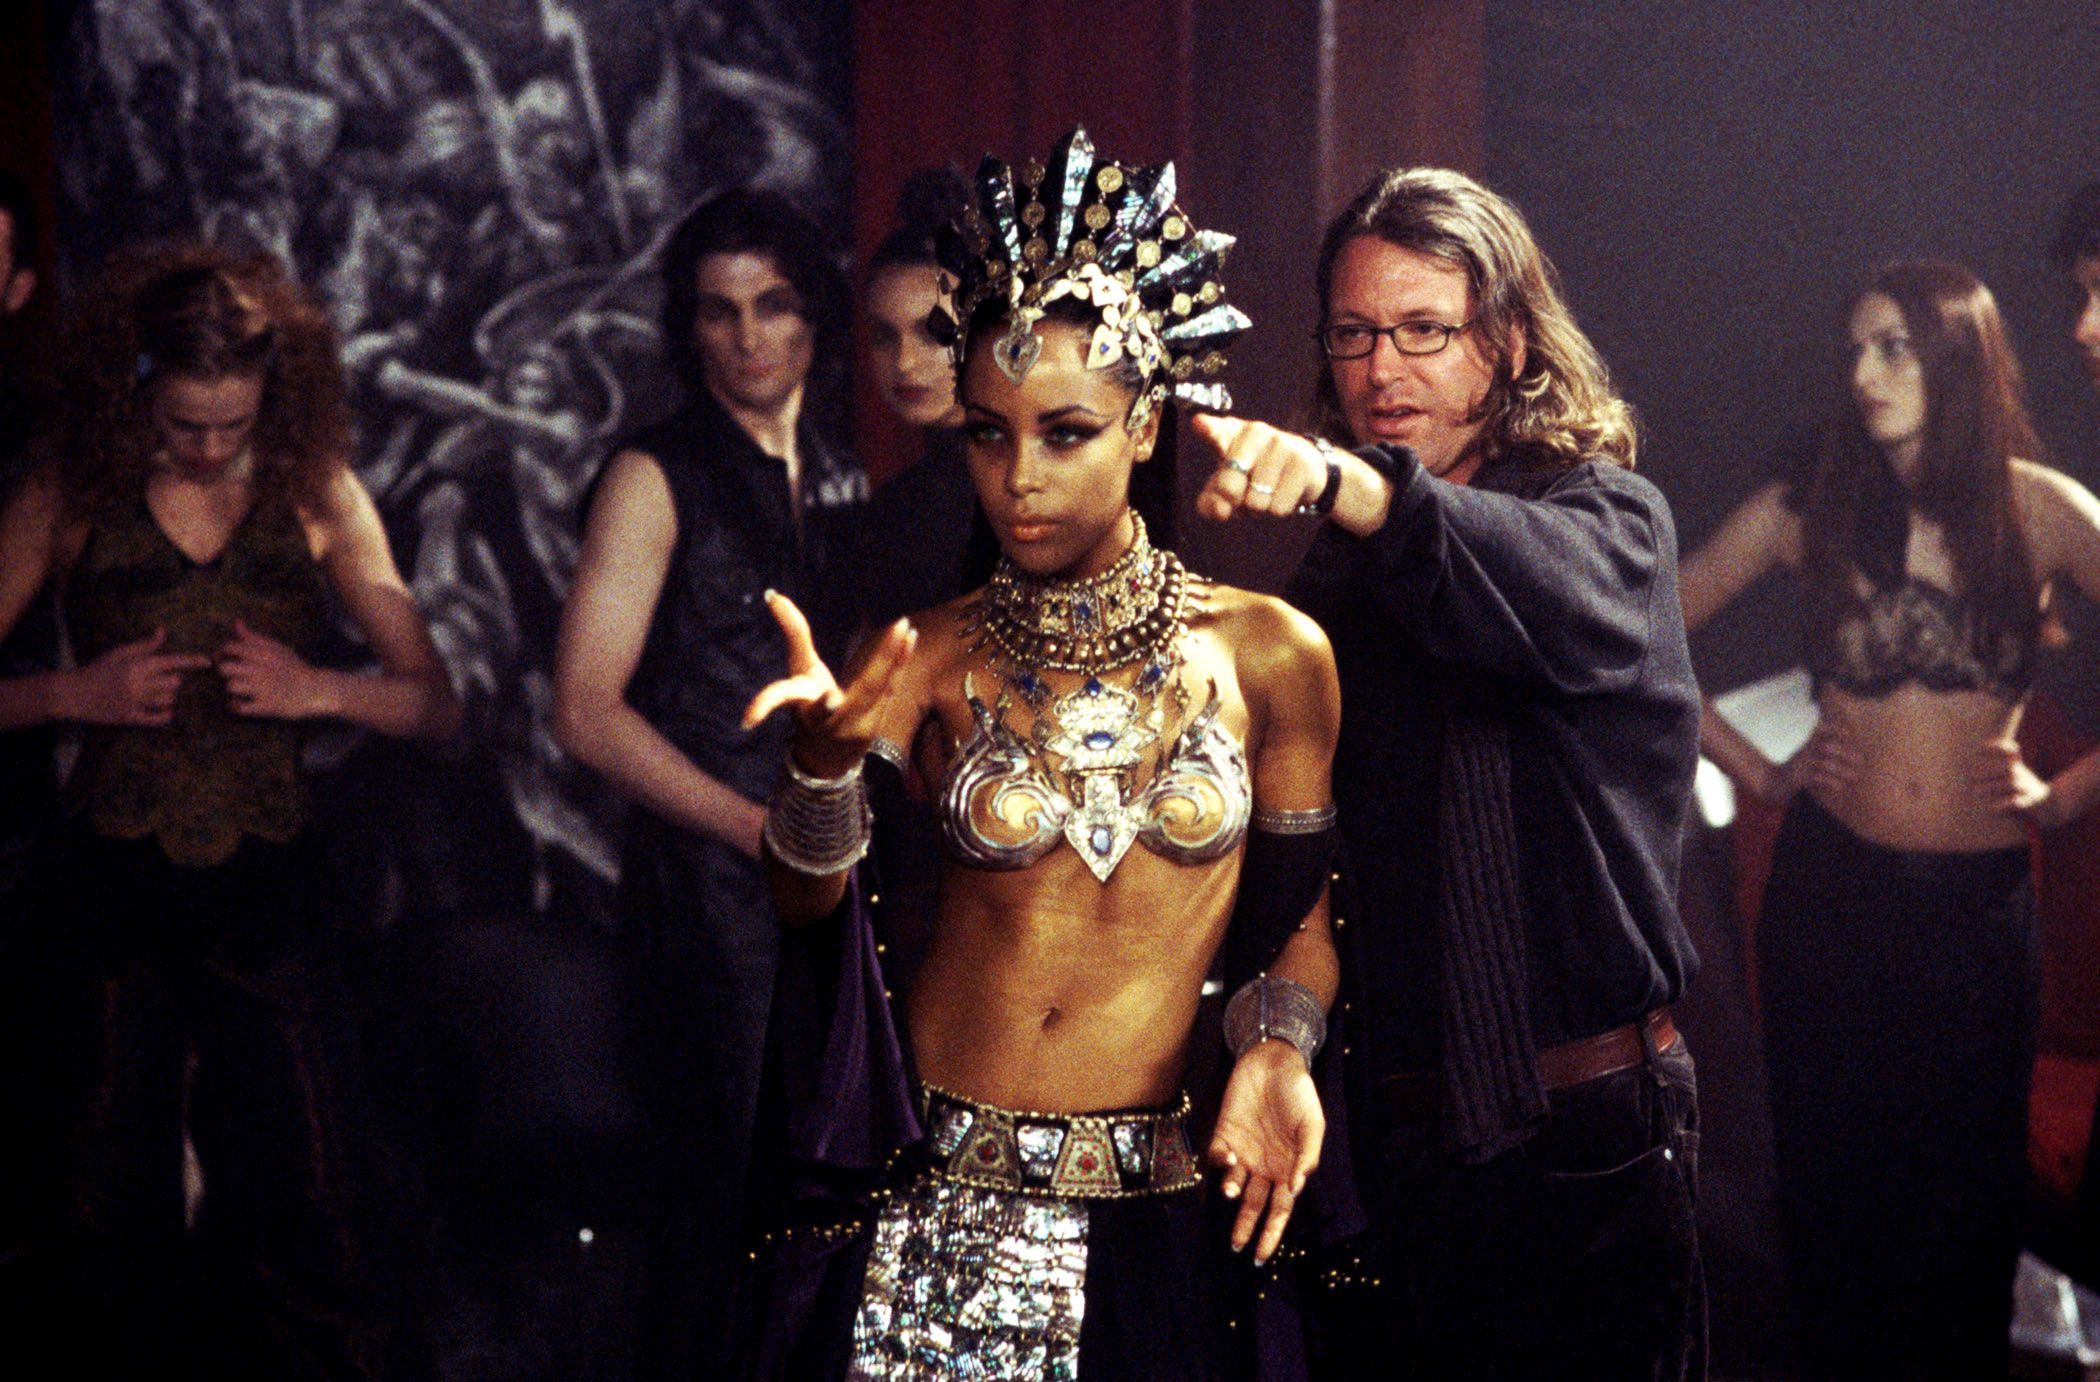 An Oral History of Queen of the Damned